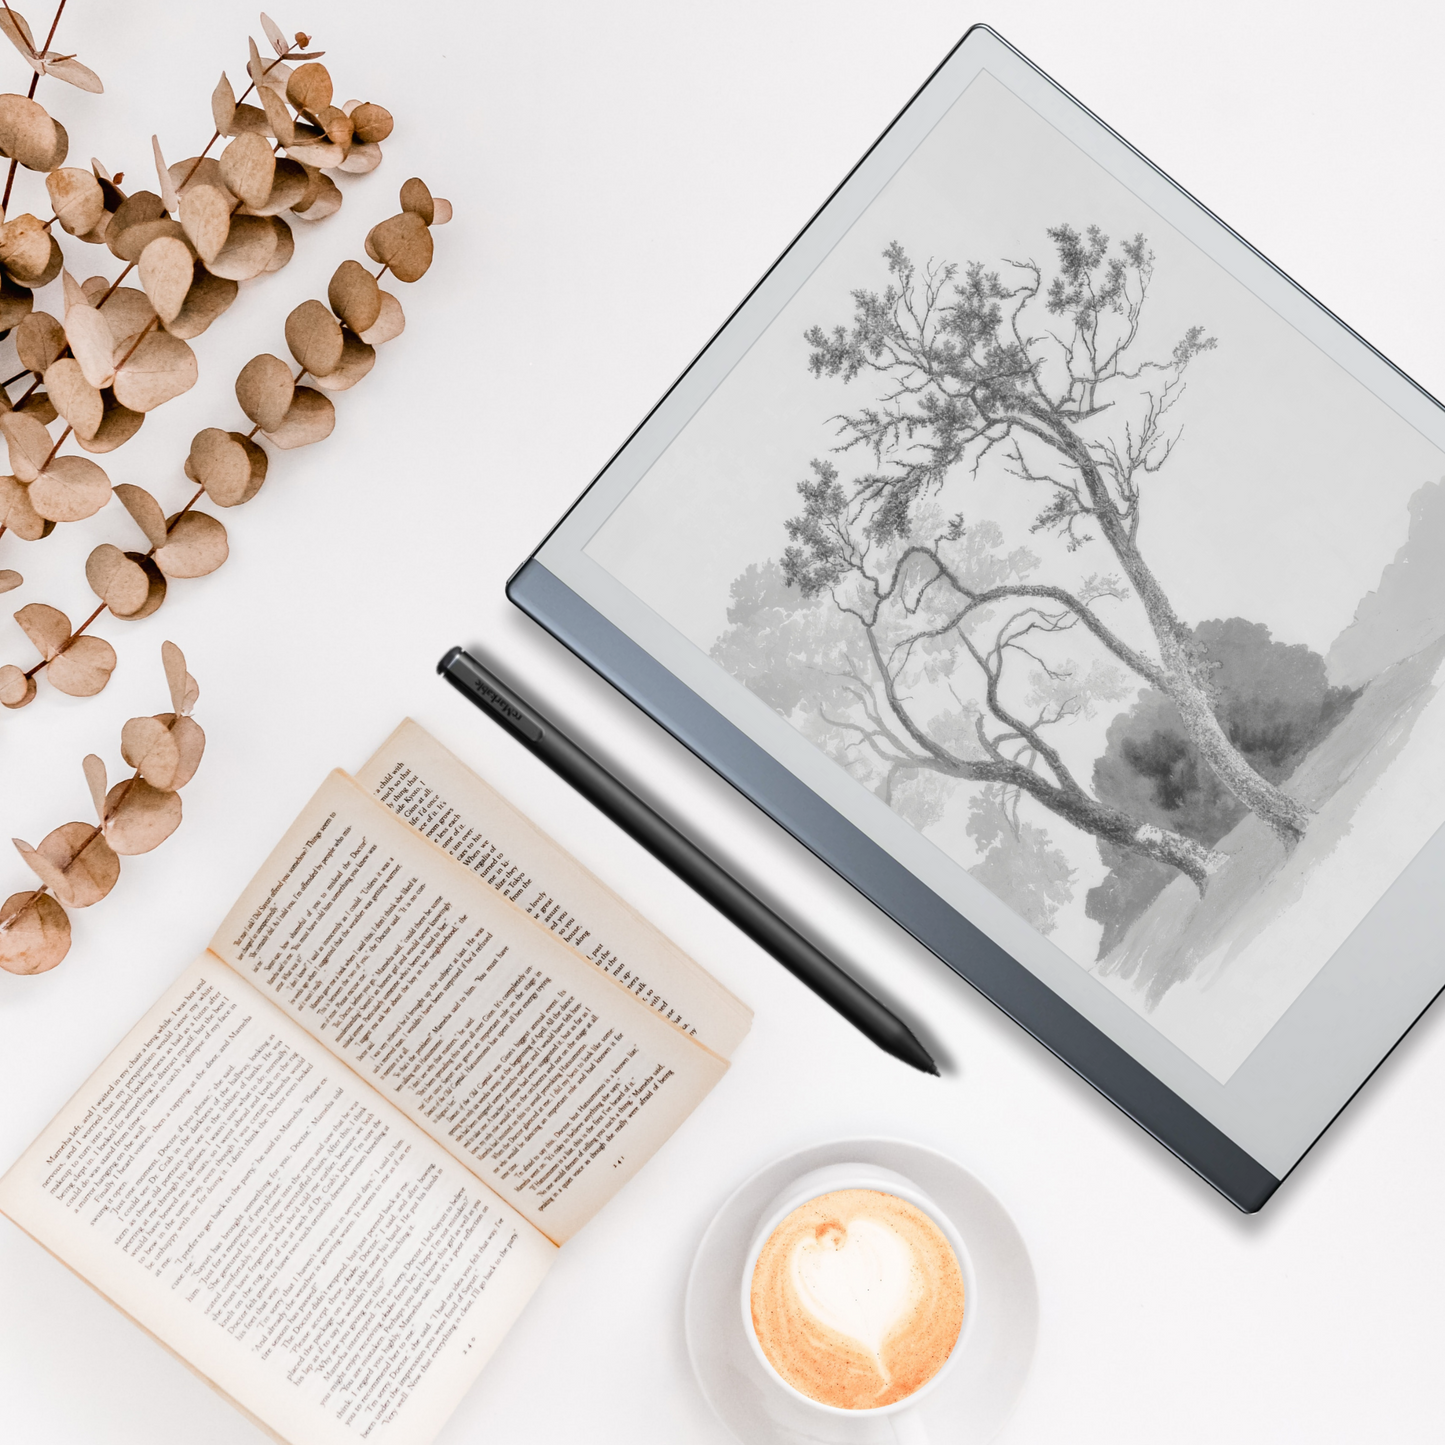 Remarkable 2 Sleep Screen & Notebook Cover Artwork - Orchard Trees